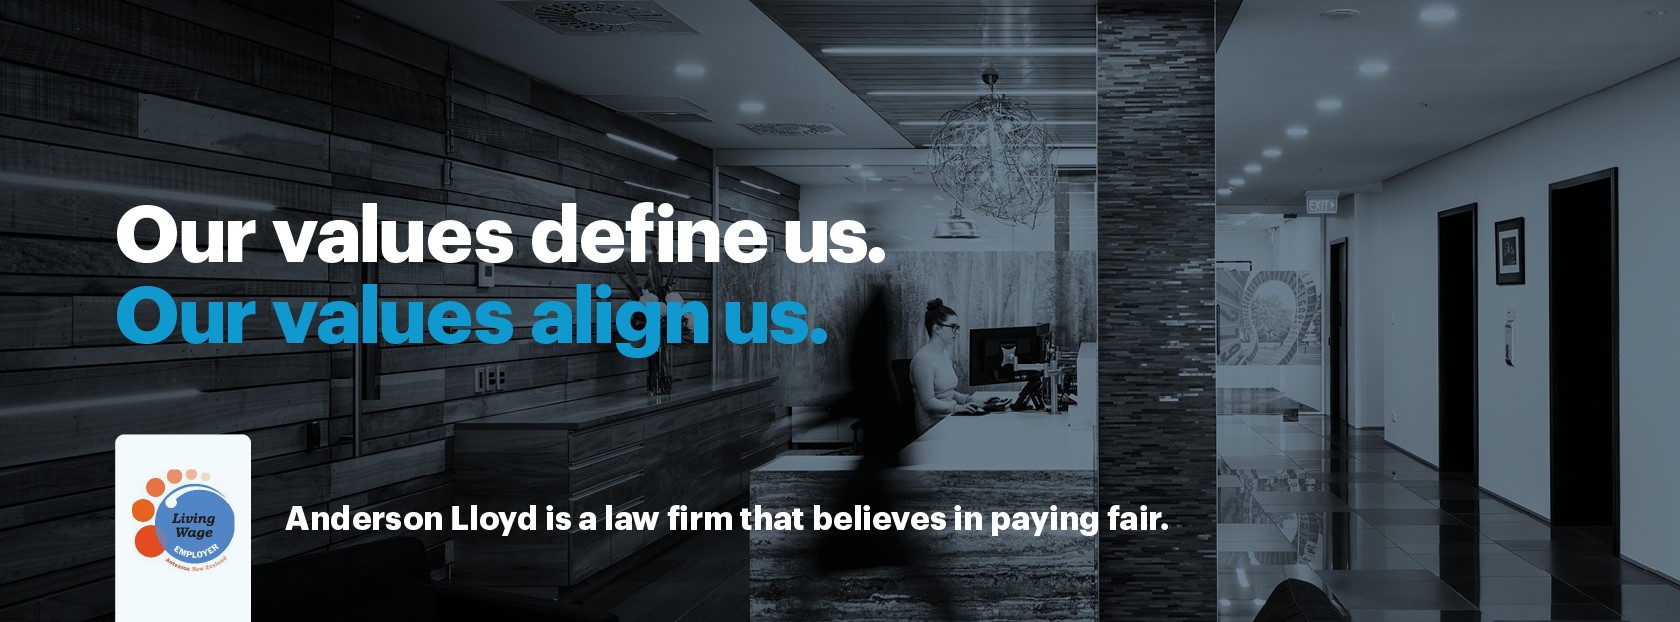 Anderson Lloyd is a law firm that believes in paying fair